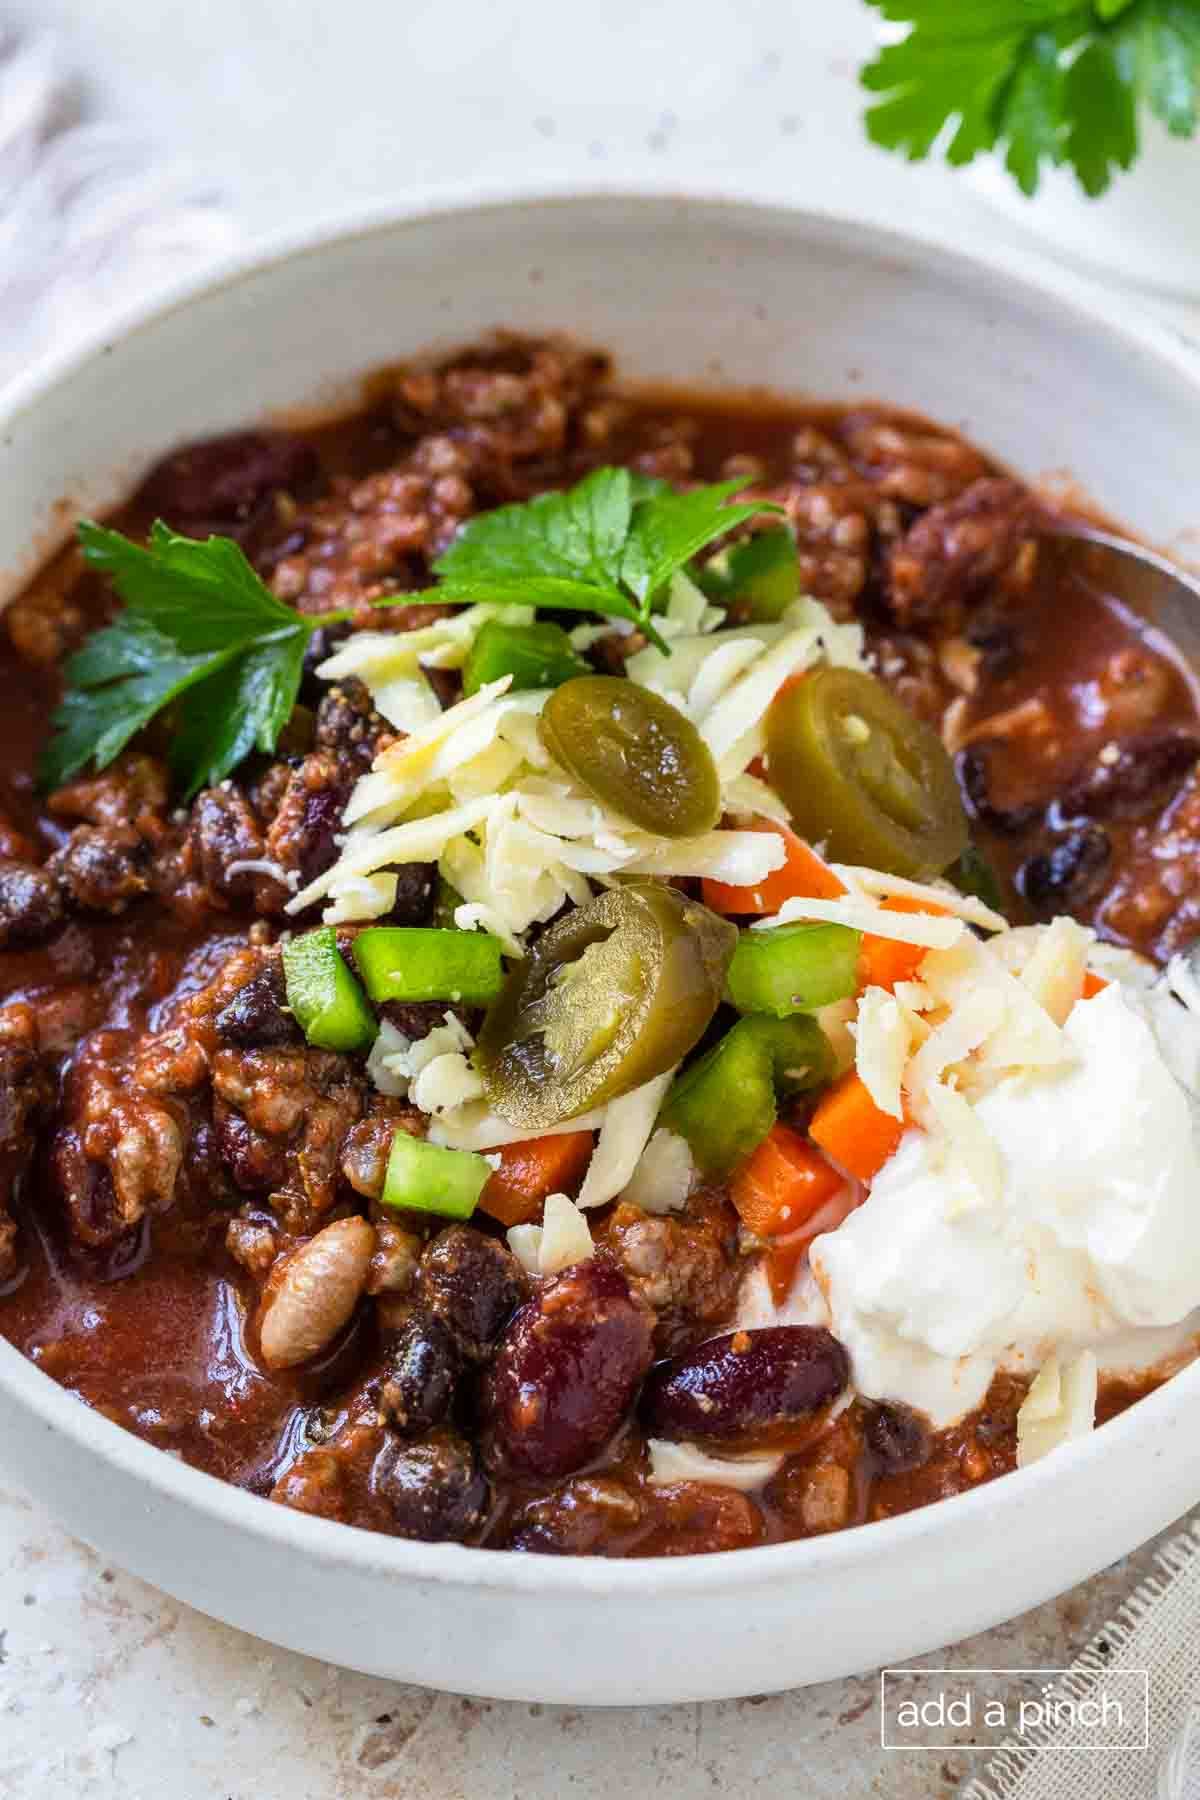 Bowl of chili with beef, beans, tomatoes and spices and then topped with sliced peppers, shredded cheese, sour cream and a sprig of fresh herbs. 